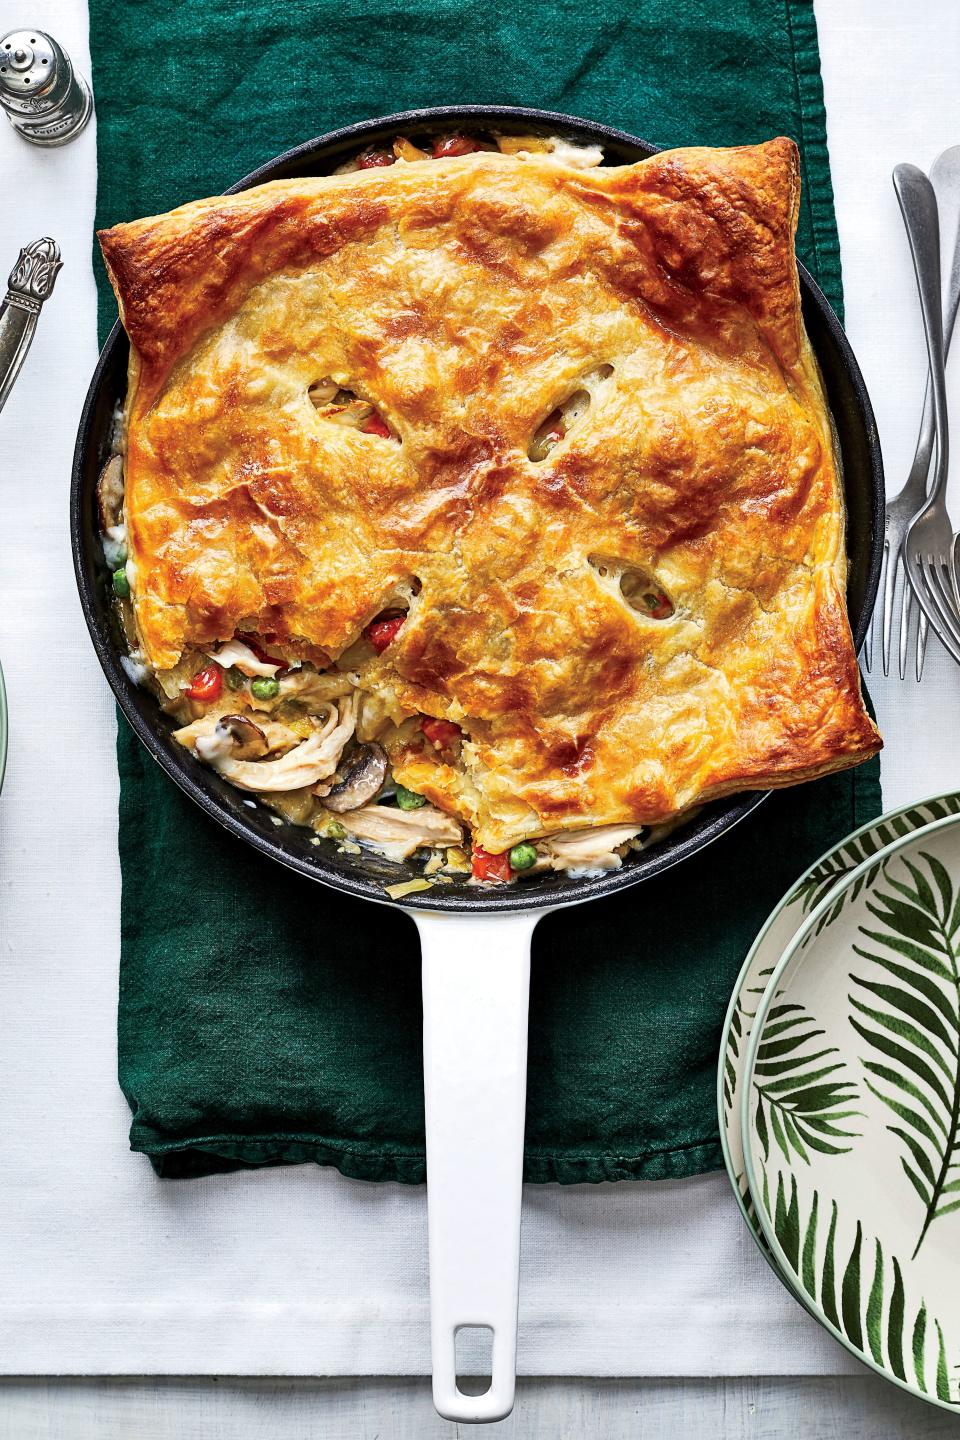 Skillet Chicken Pot Pie with Leeks and Mushrooms